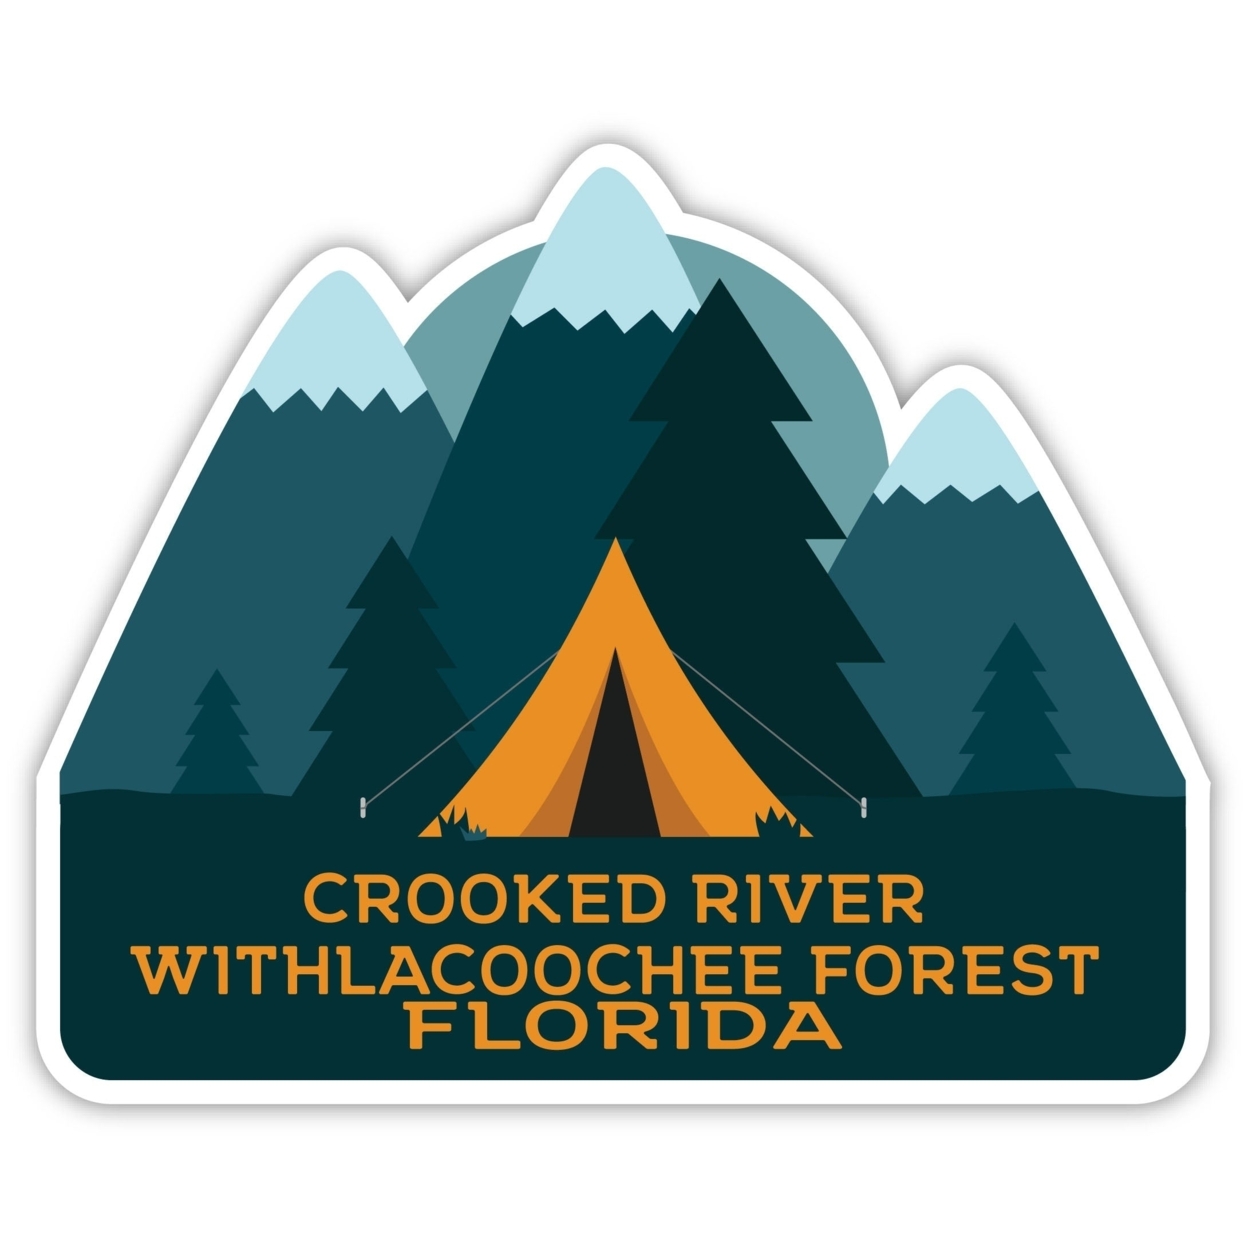 Crooked River Withlacoochee Forest Florida Souvenir Decorative Stickers (Choose Theme And Size) - Single Unit, 6-Inch, Tent